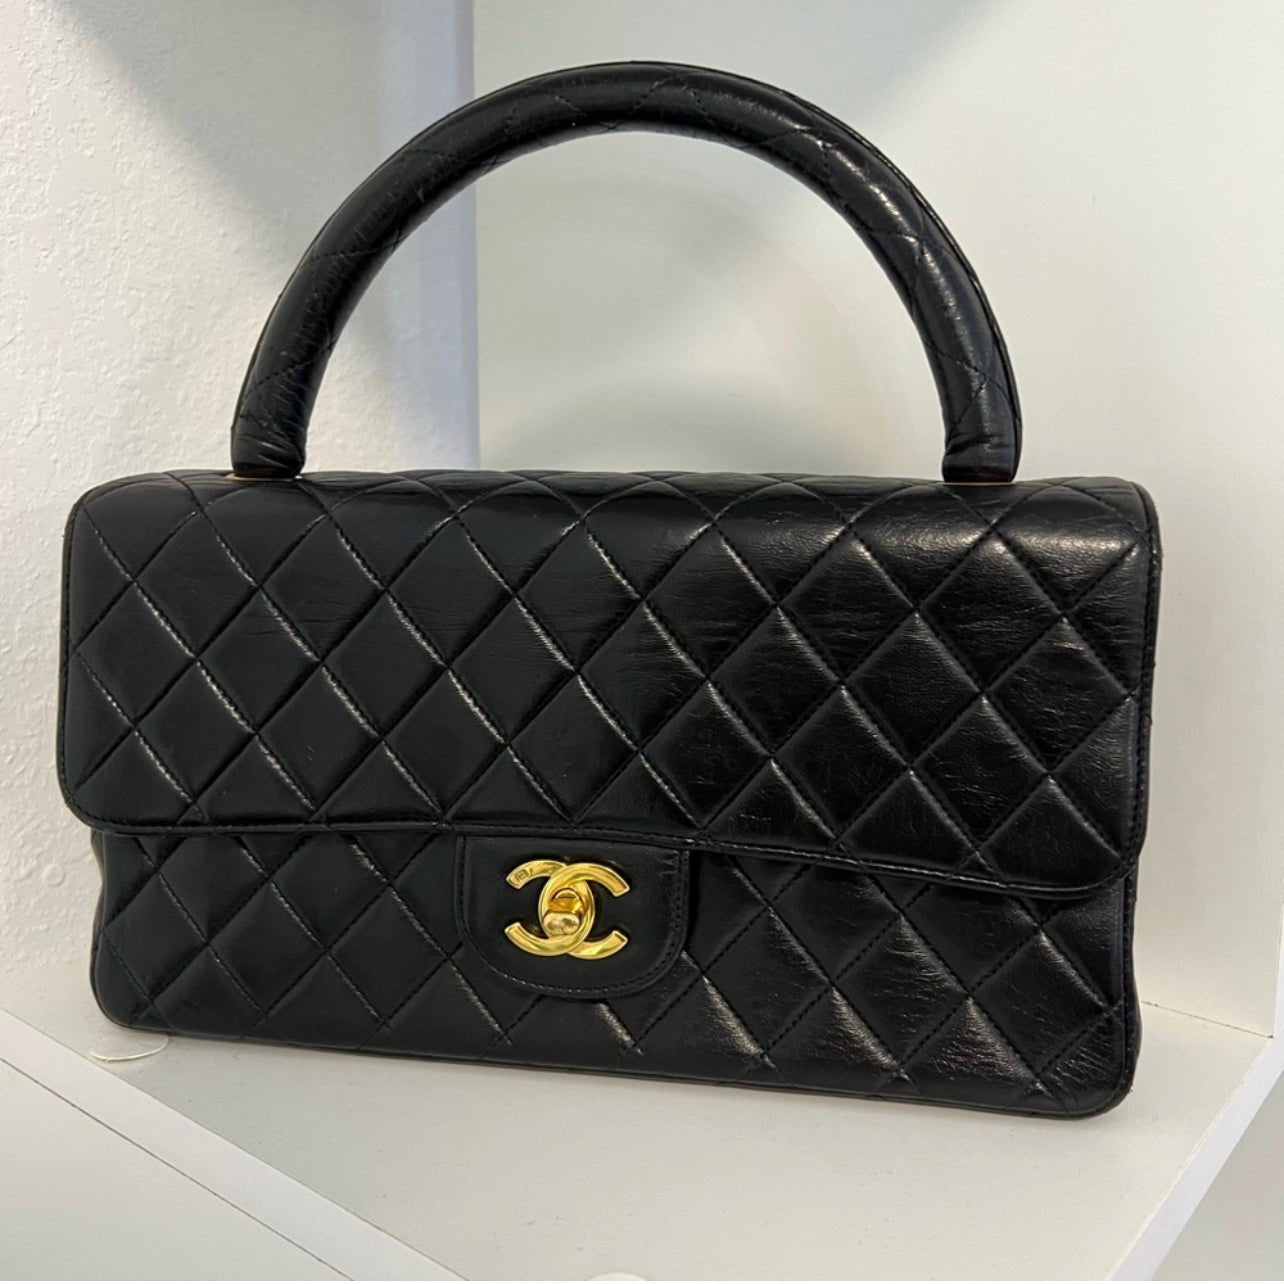 quilted chanel flap bag medium